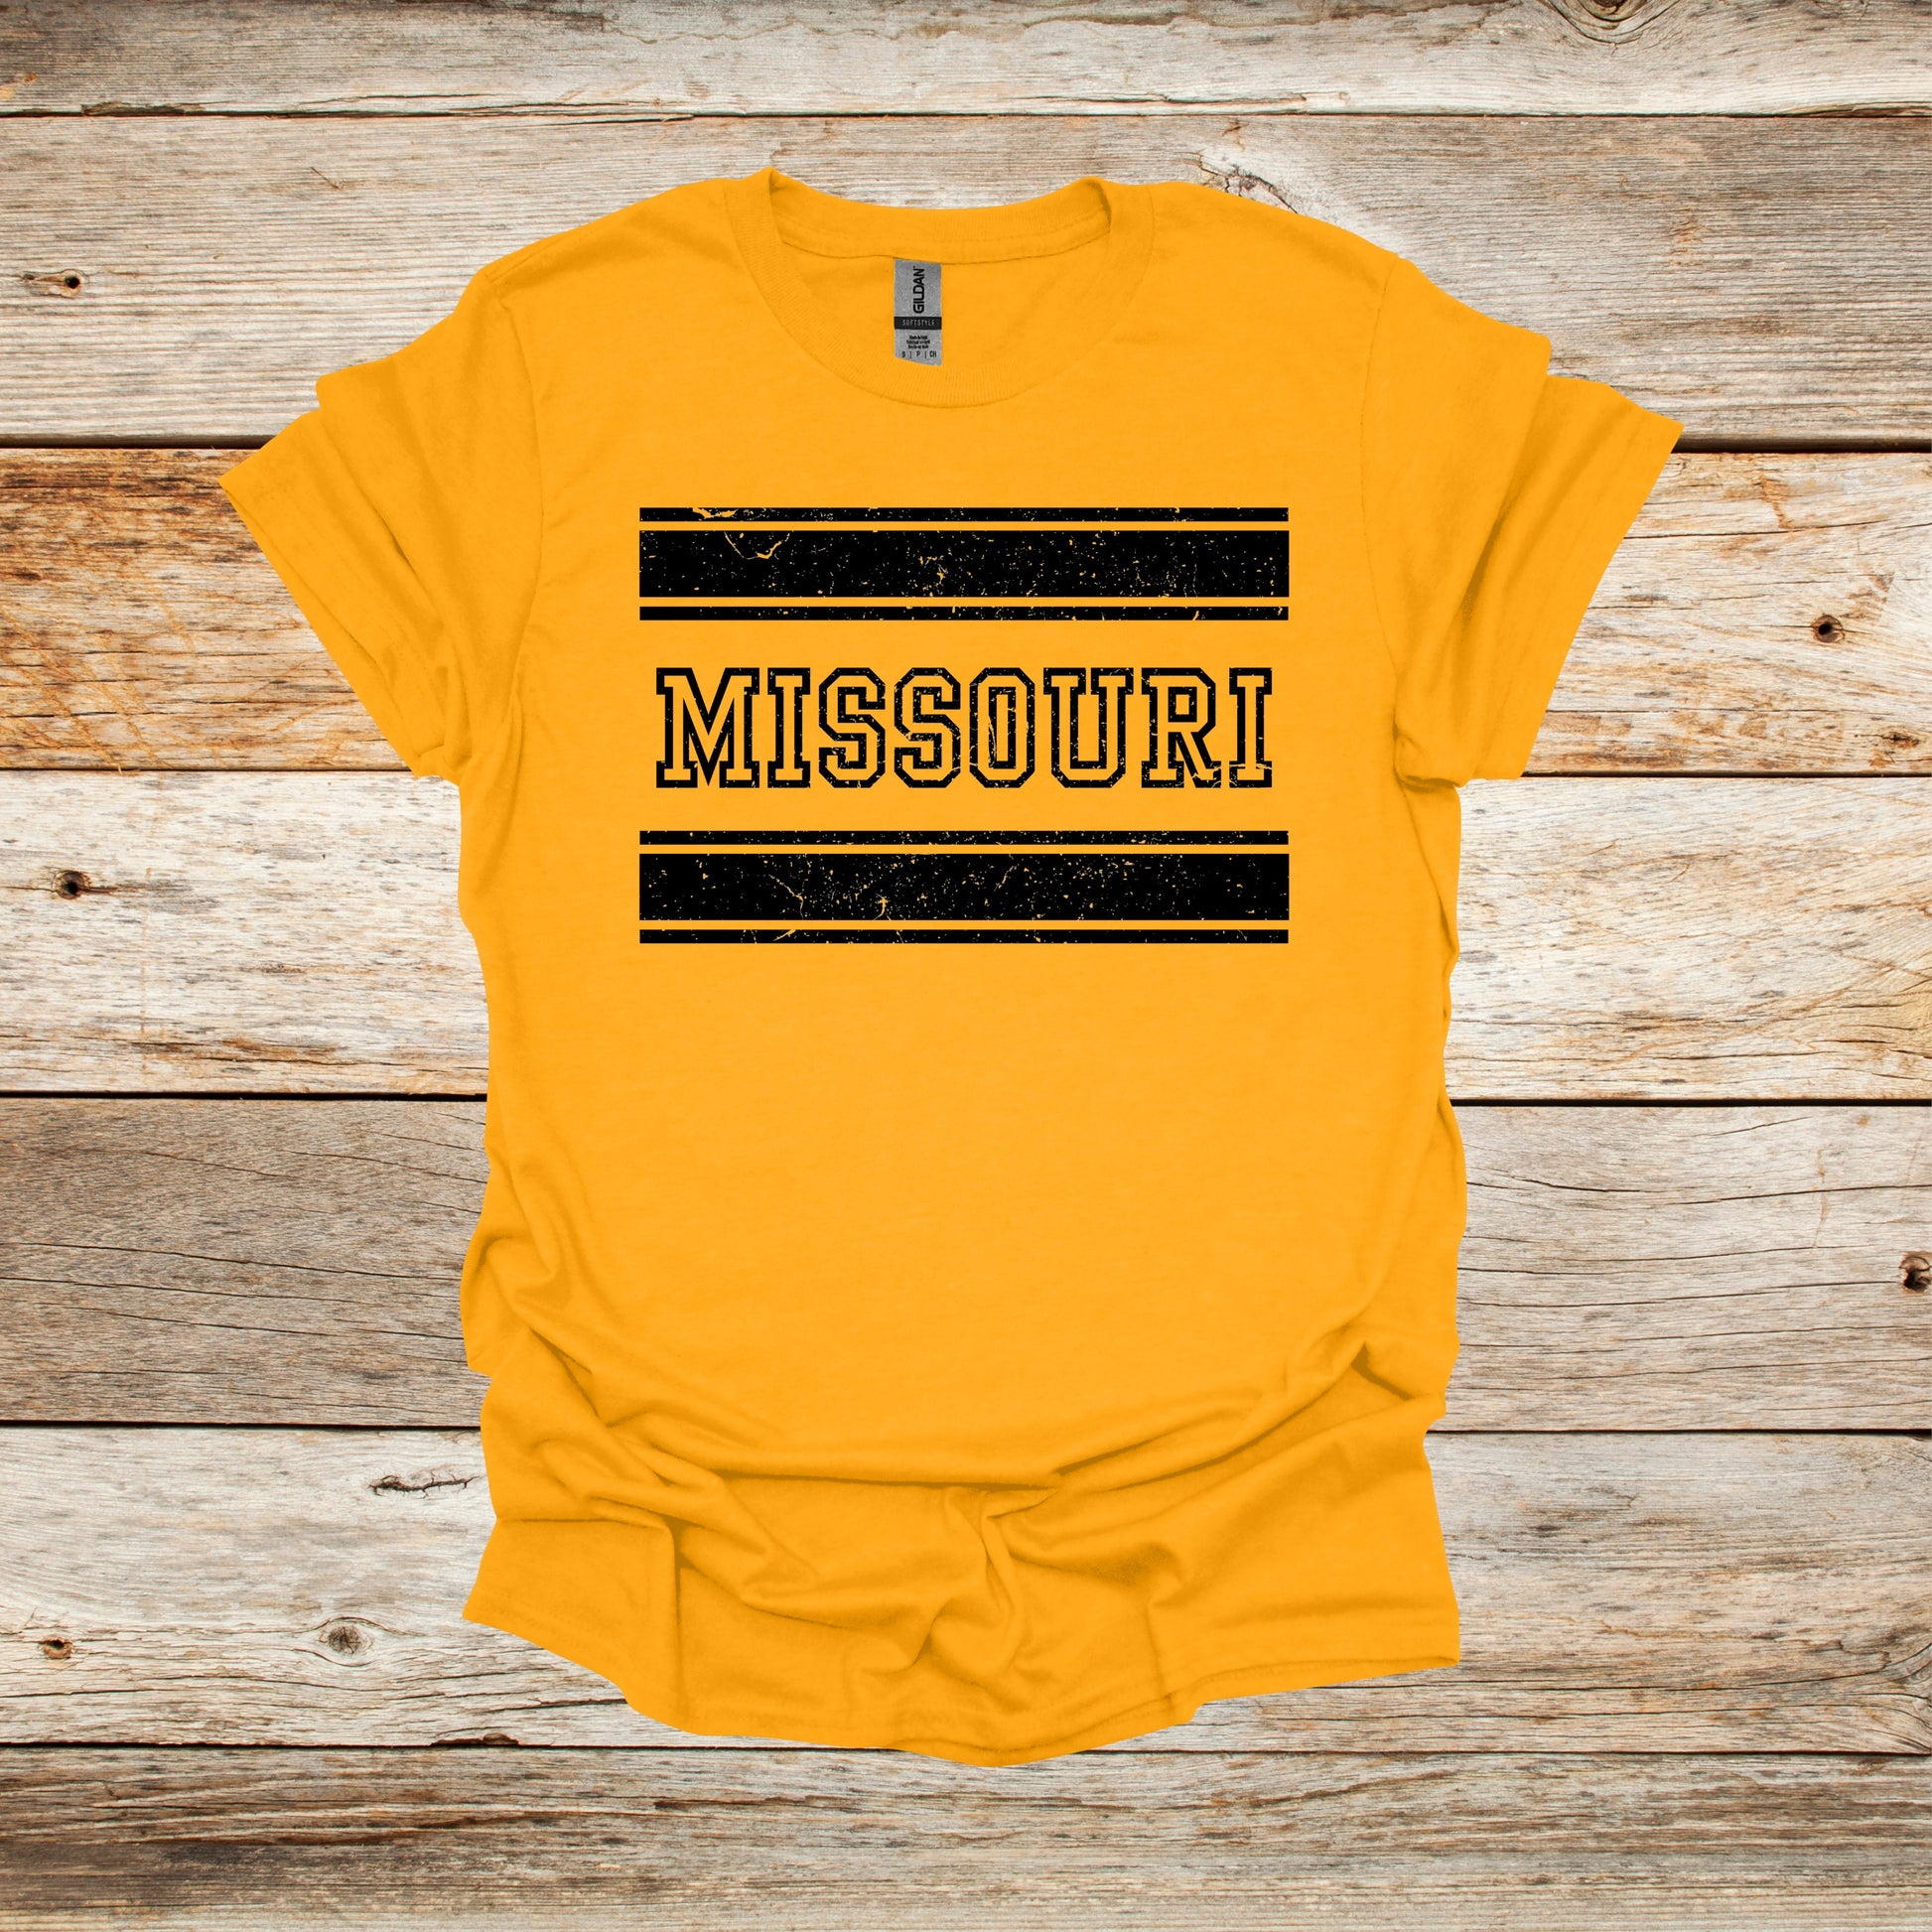 College T Shirt - Missouri Tigers - Adult and Children's Tee Shirts T-Shirts Graphic Avenue Gold Adult Small 